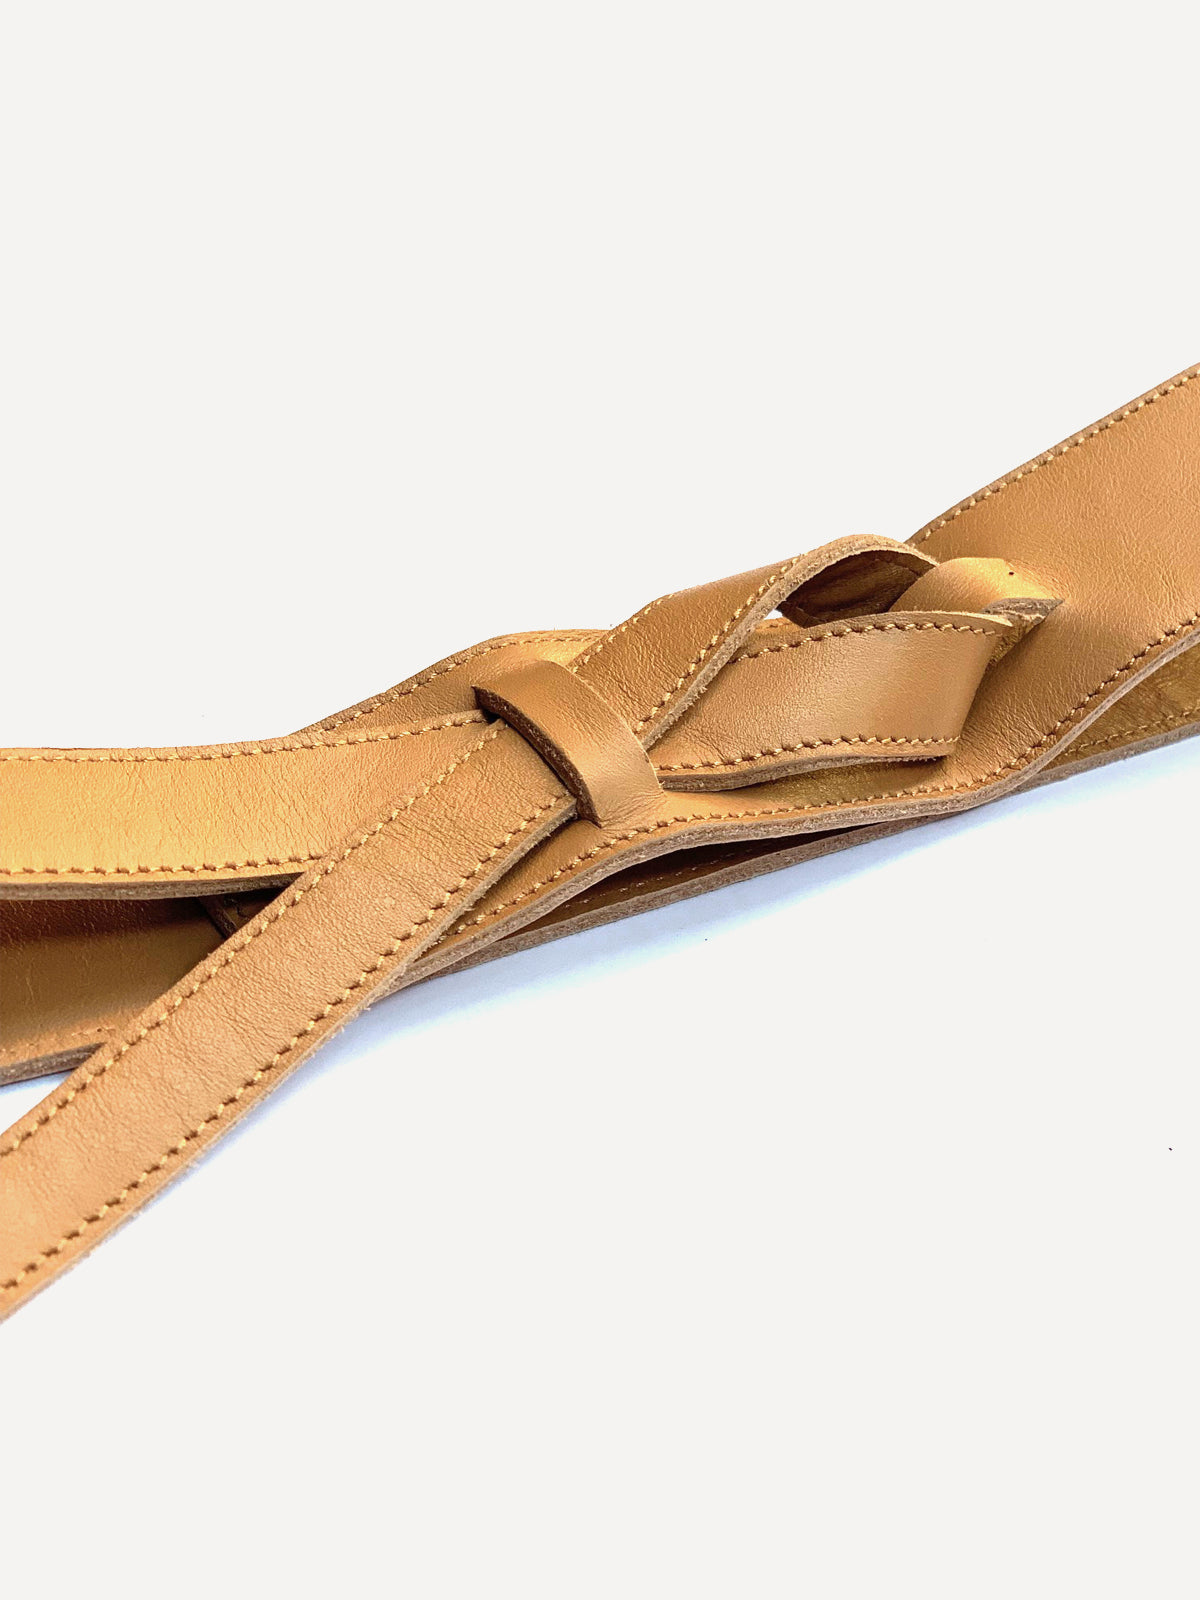 Knotted brown women's leather belt